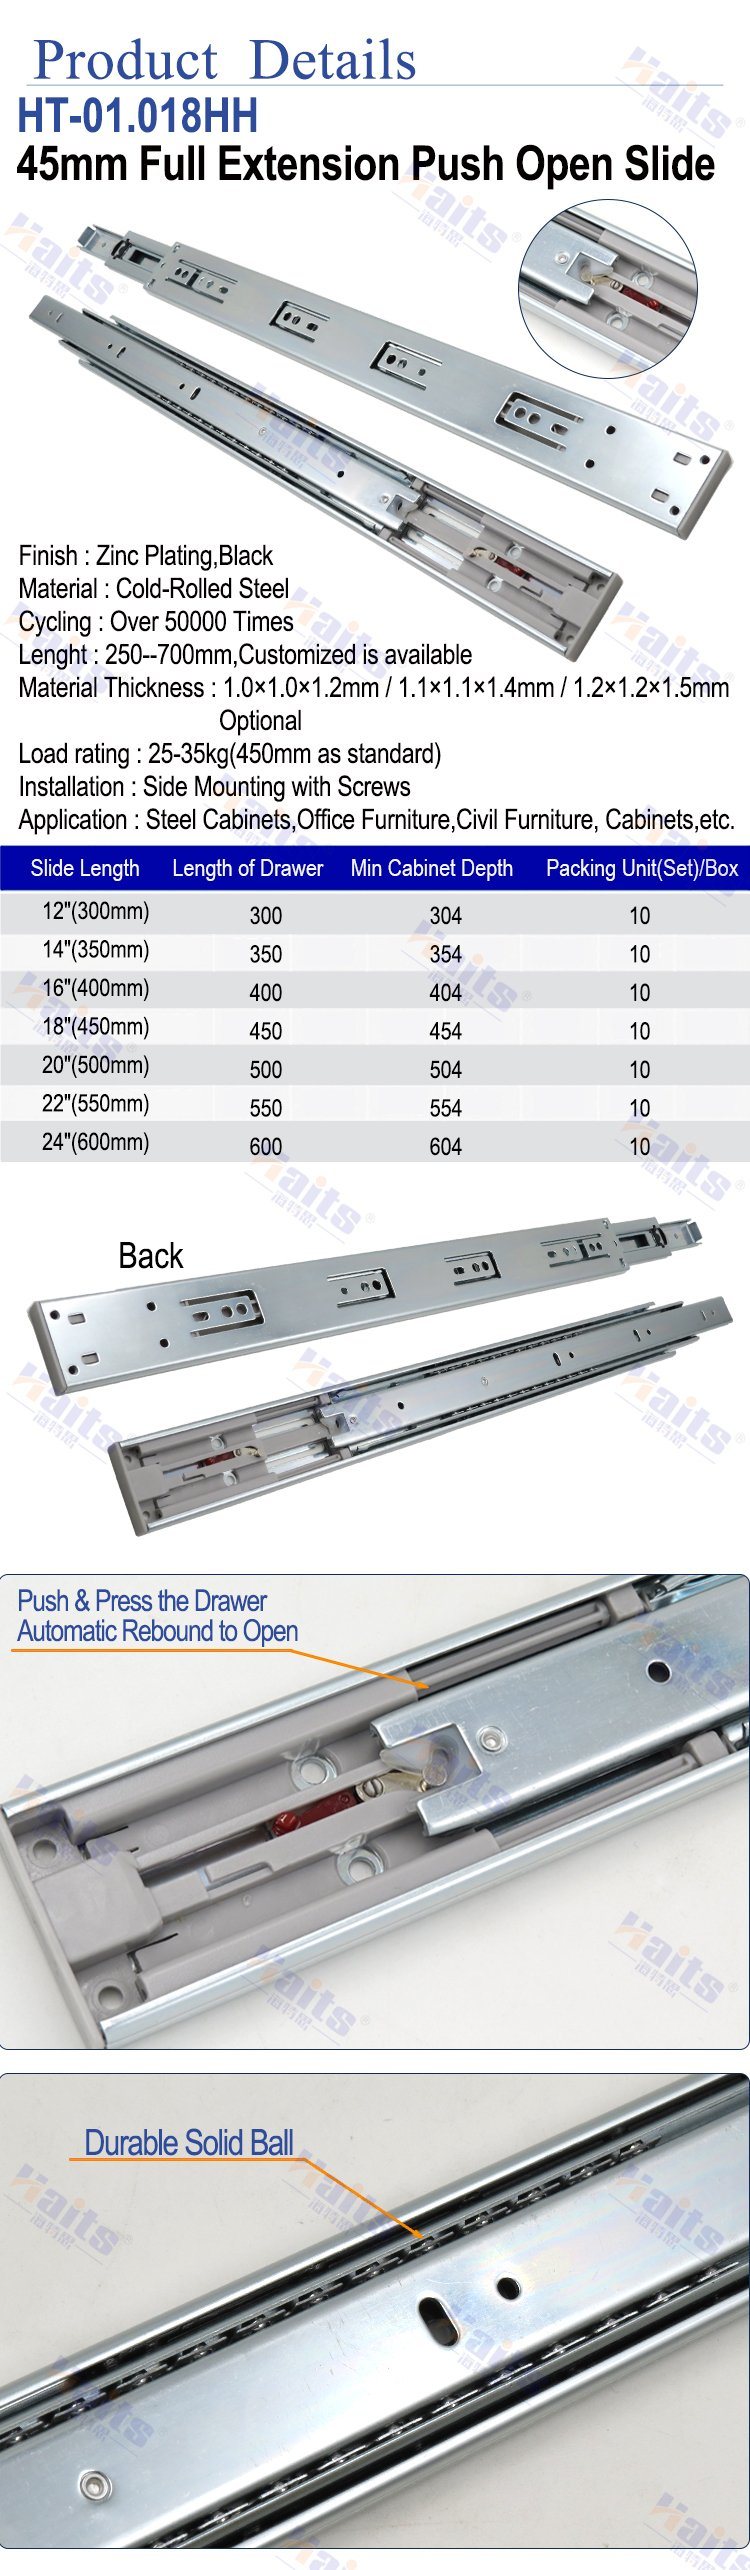 Drawer Slide 45mm Push to Open Telescopic Channel